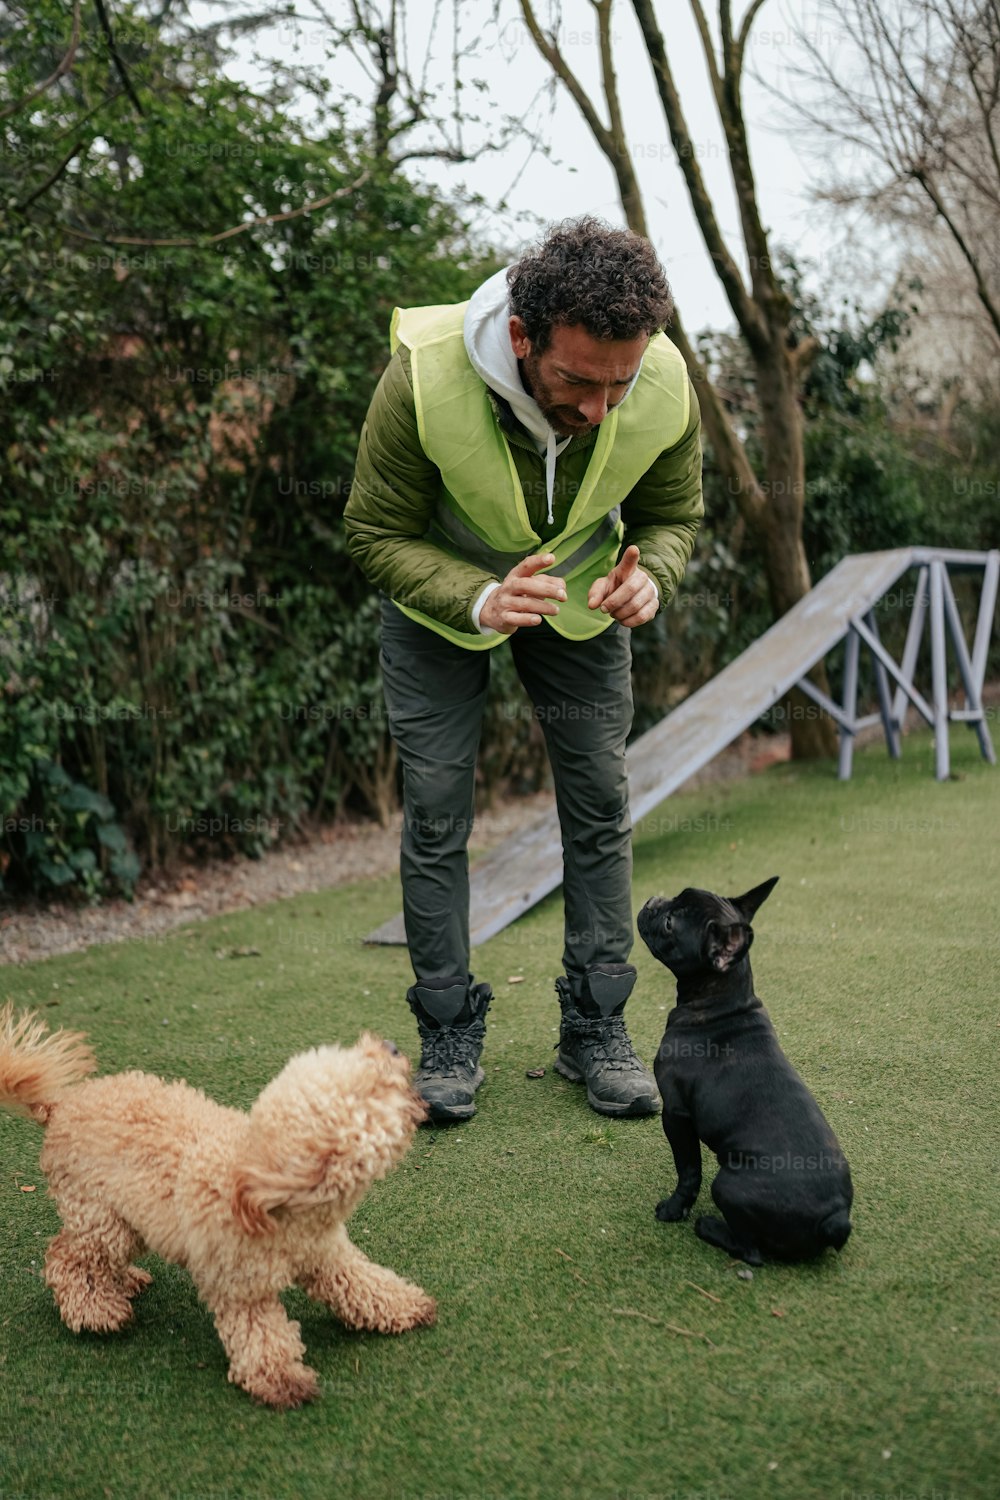 a man playing with two dogs in a yard